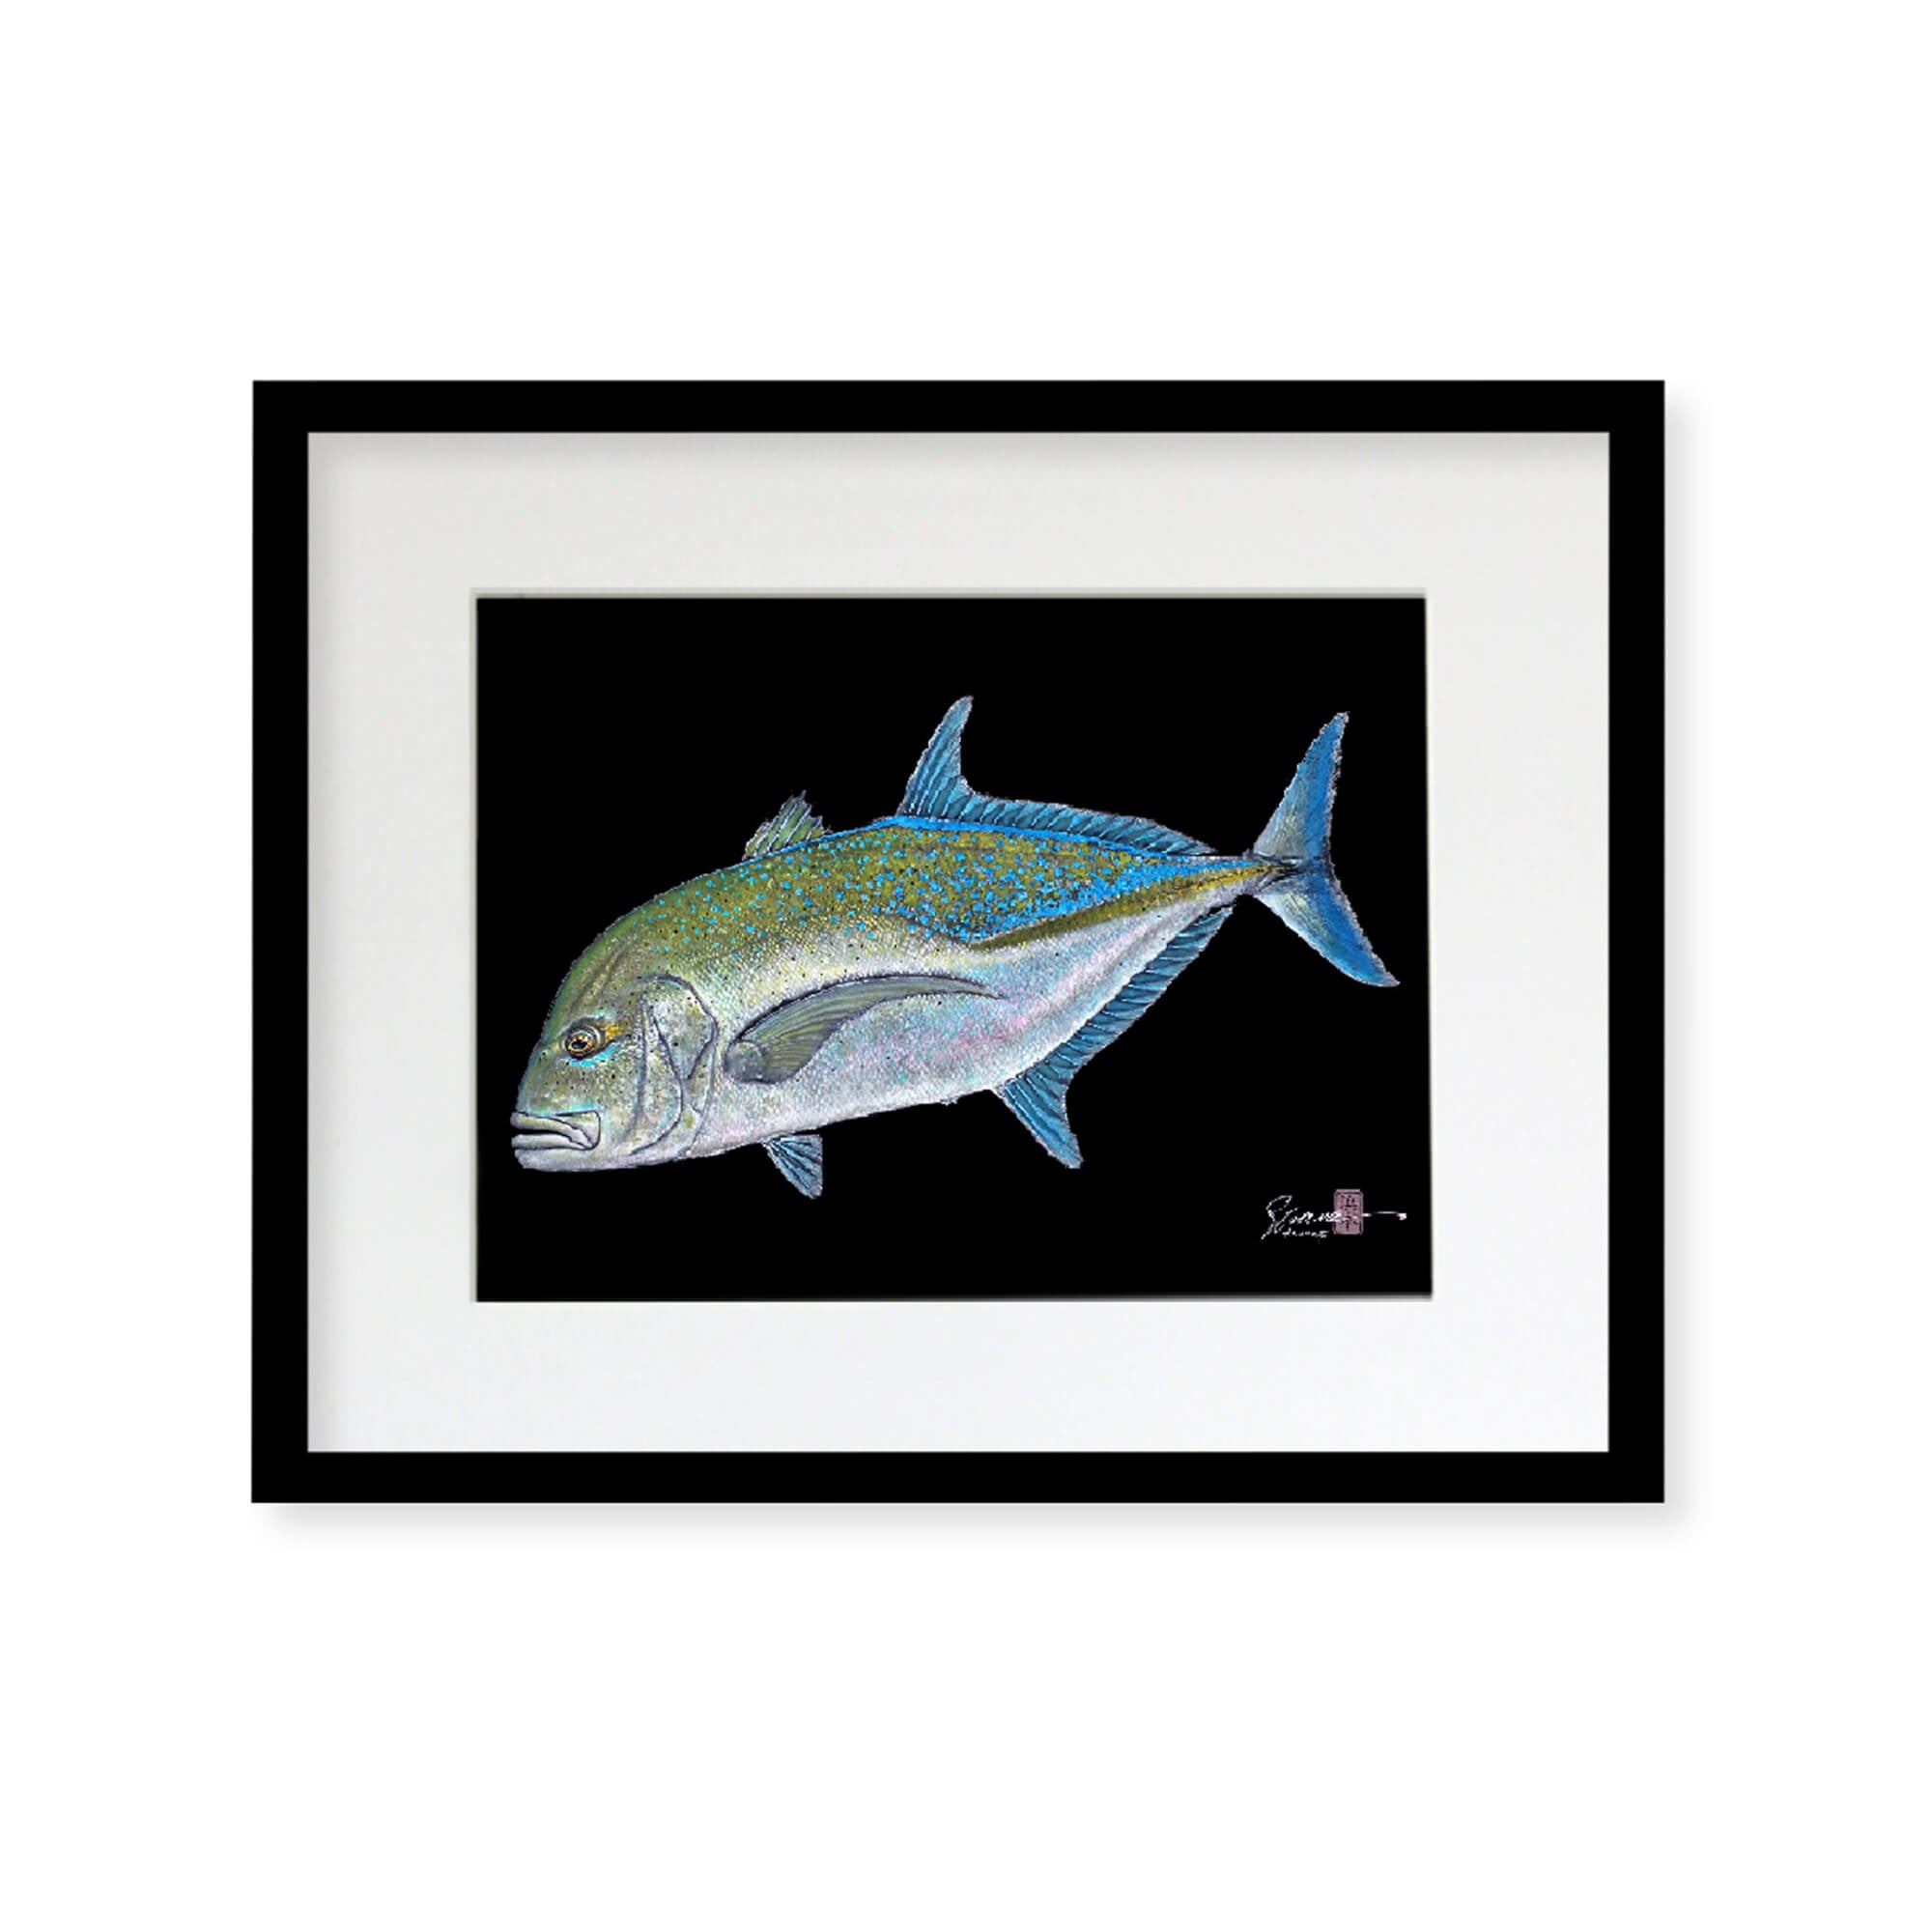 Framed matted print of Omilu (also known as Bluefin Trevally) by Hawaii gyotaku artist Shane Hamamoto